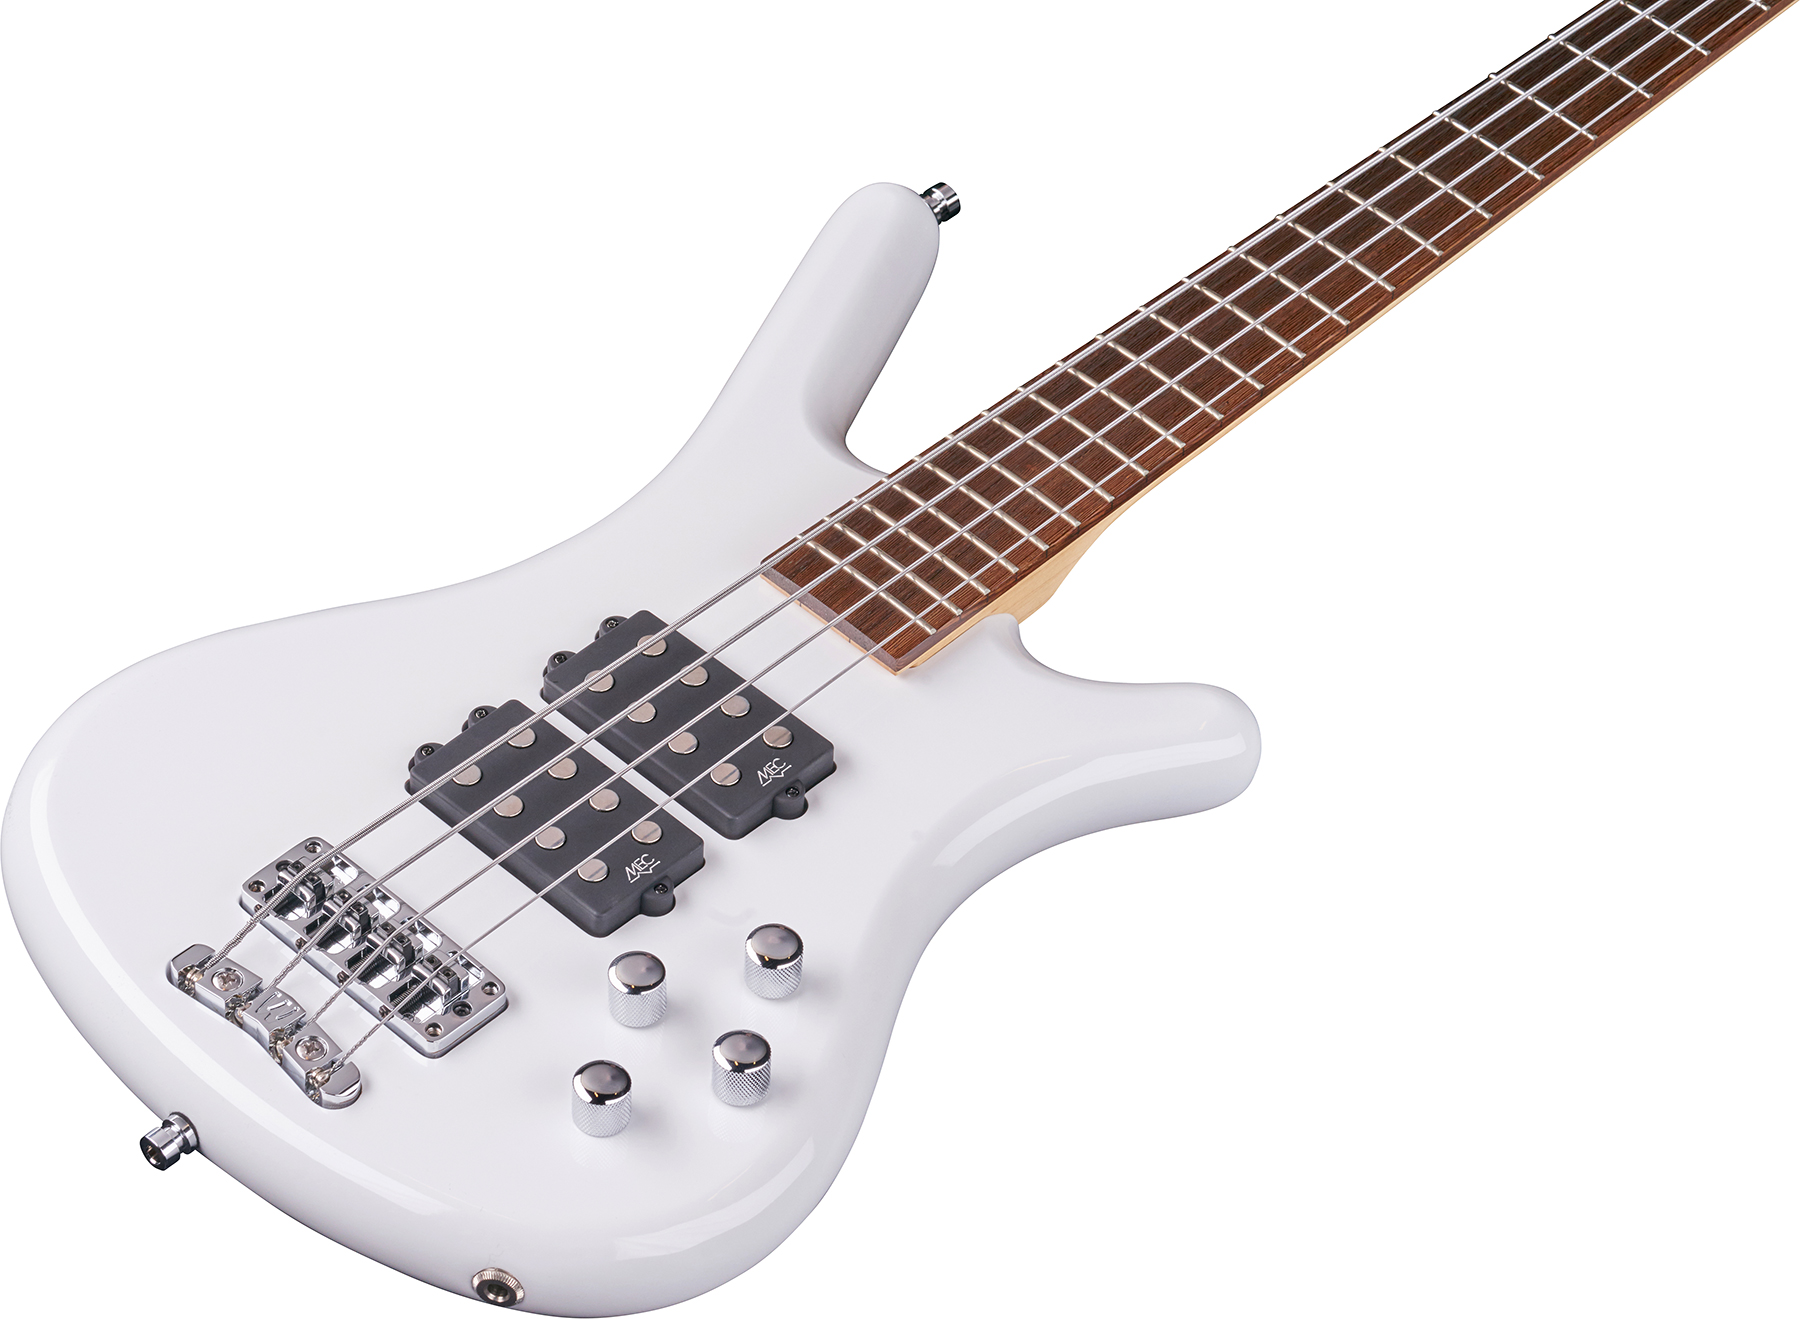 Warwick Corvette $$ 4c Rockbass Active Wen - Solid White - Solid body electric bass - Variation 2